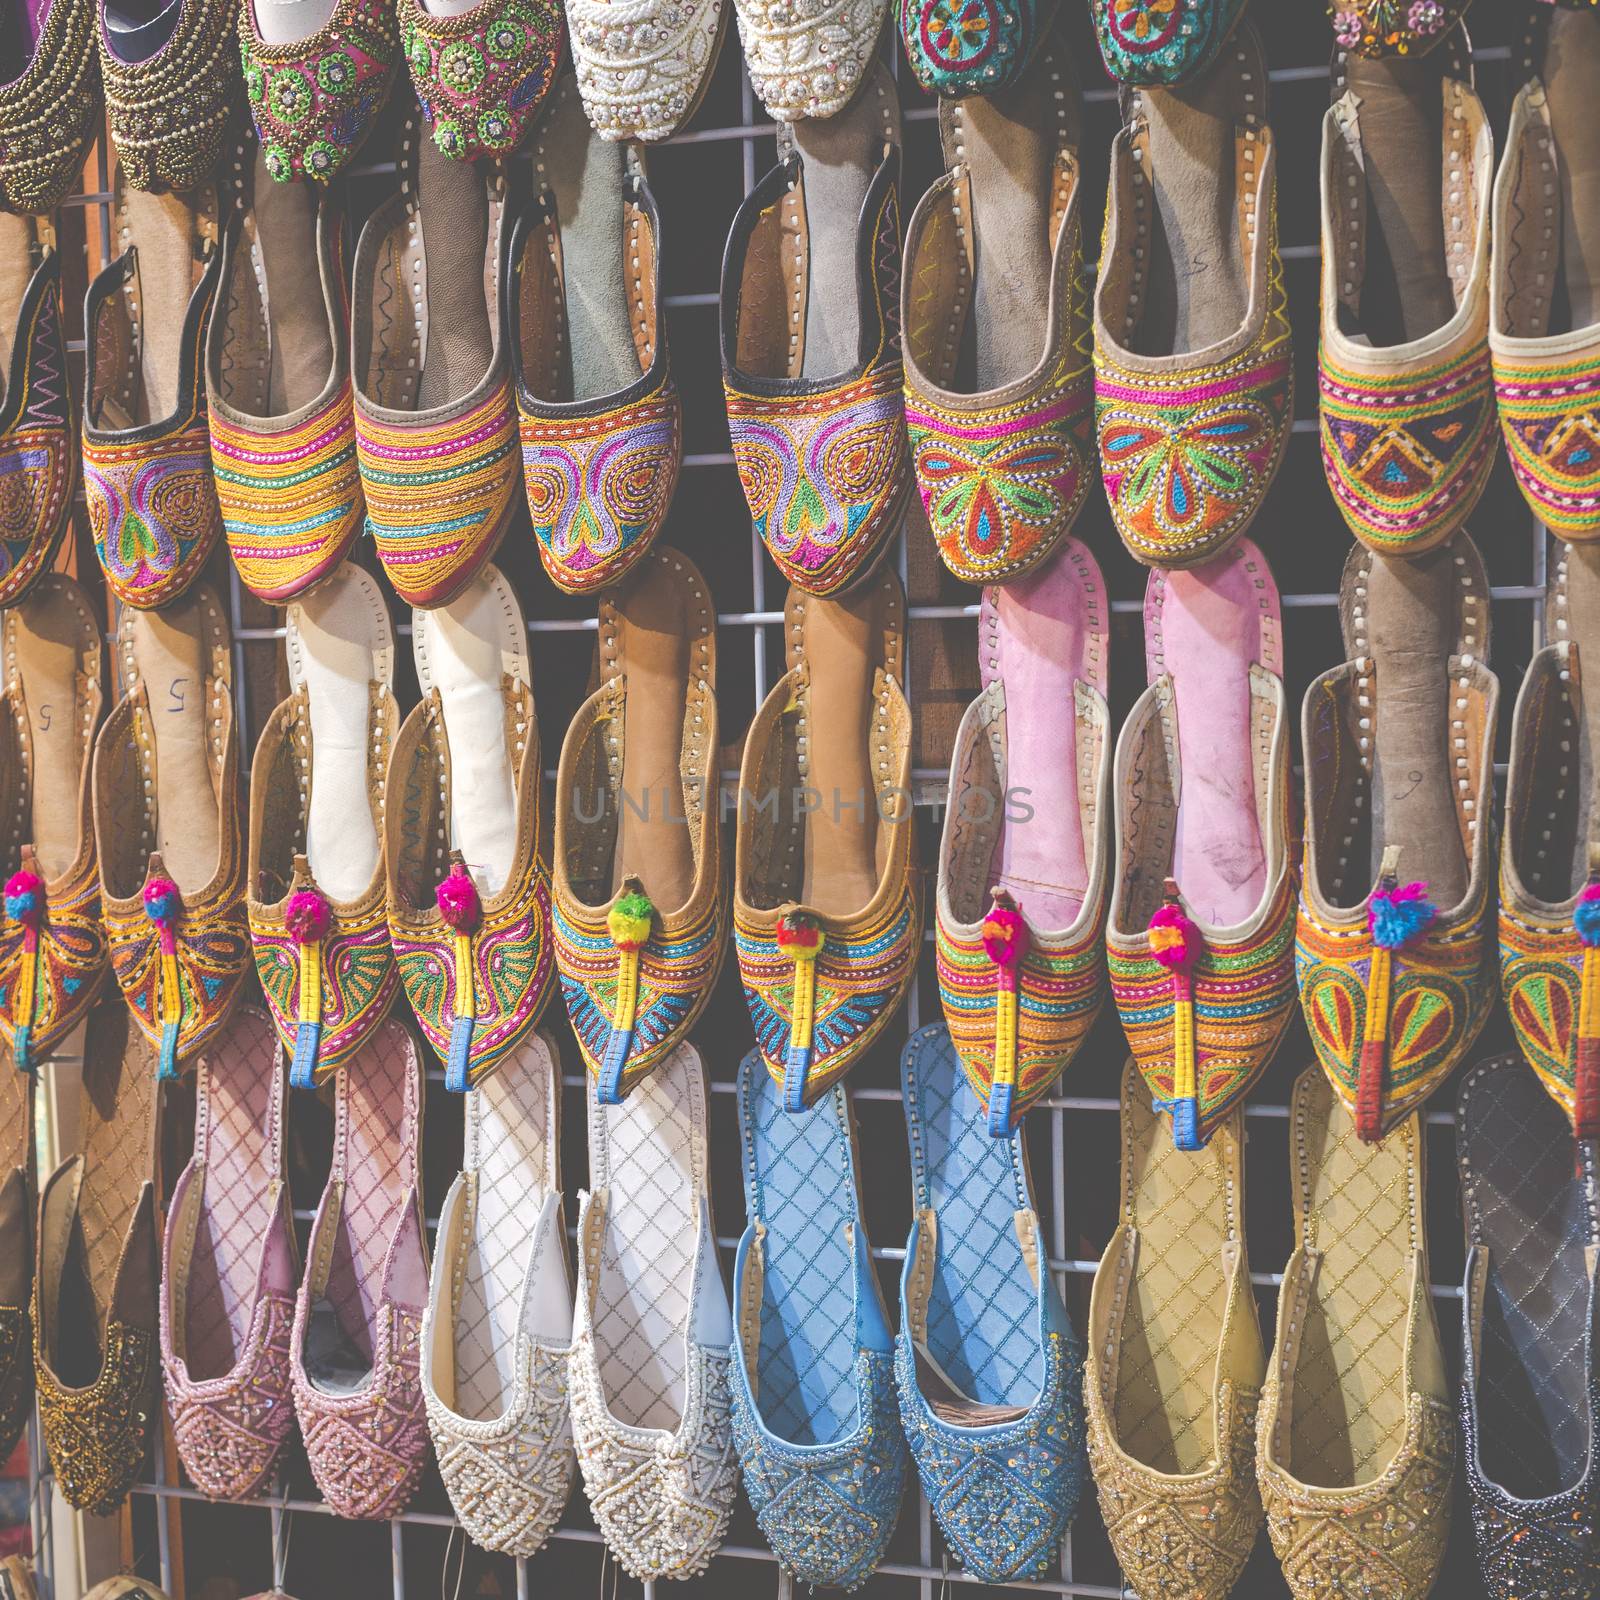 Rows of typically oriental shoes at the market in Dubai by mariusz_prusaczyk